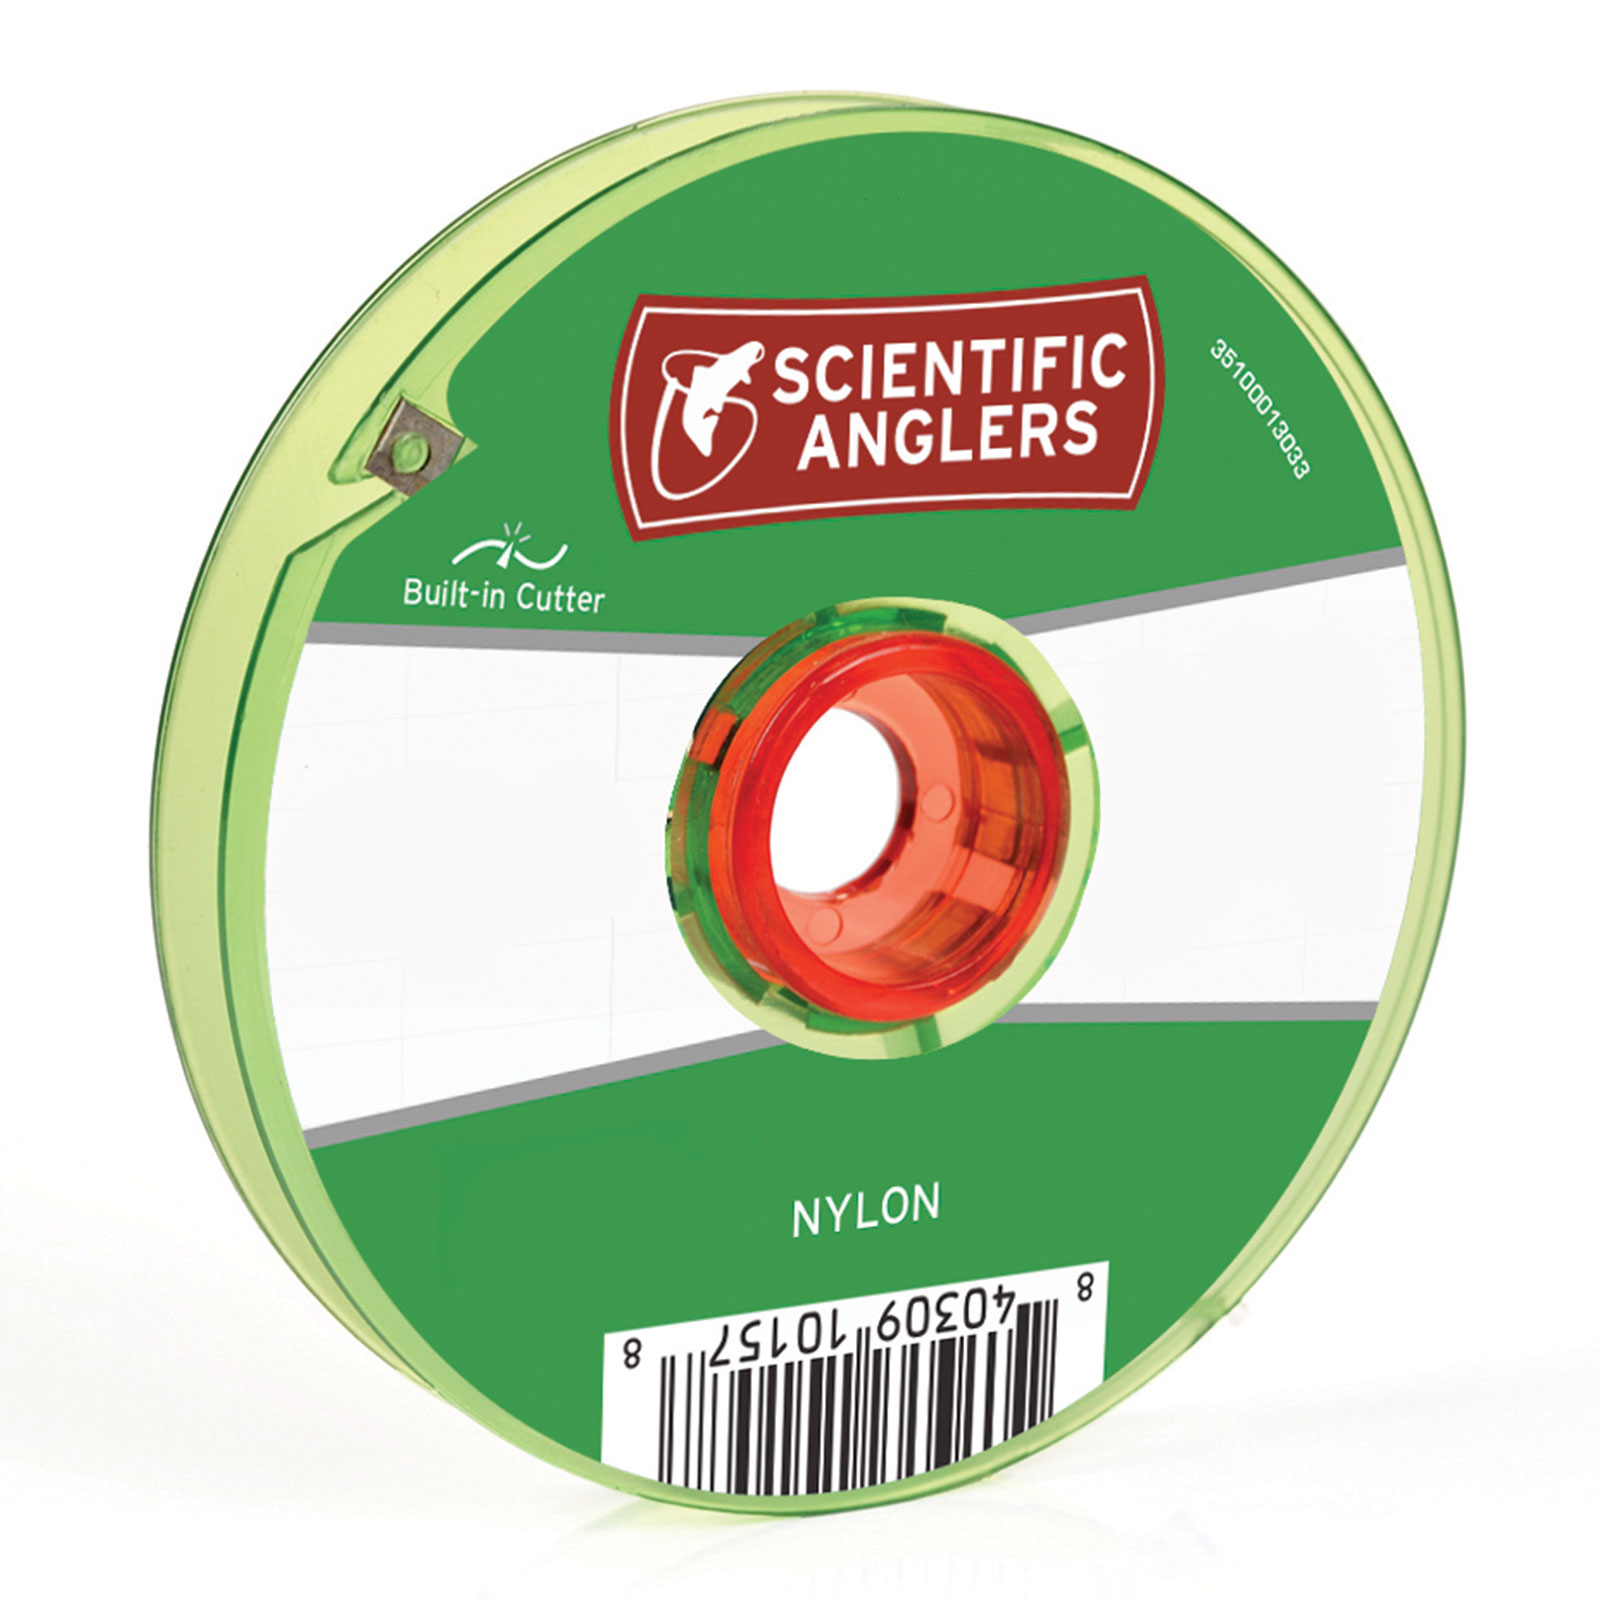 Scientific Anglers Nylon Fly Fishing Tippet - AvidMax